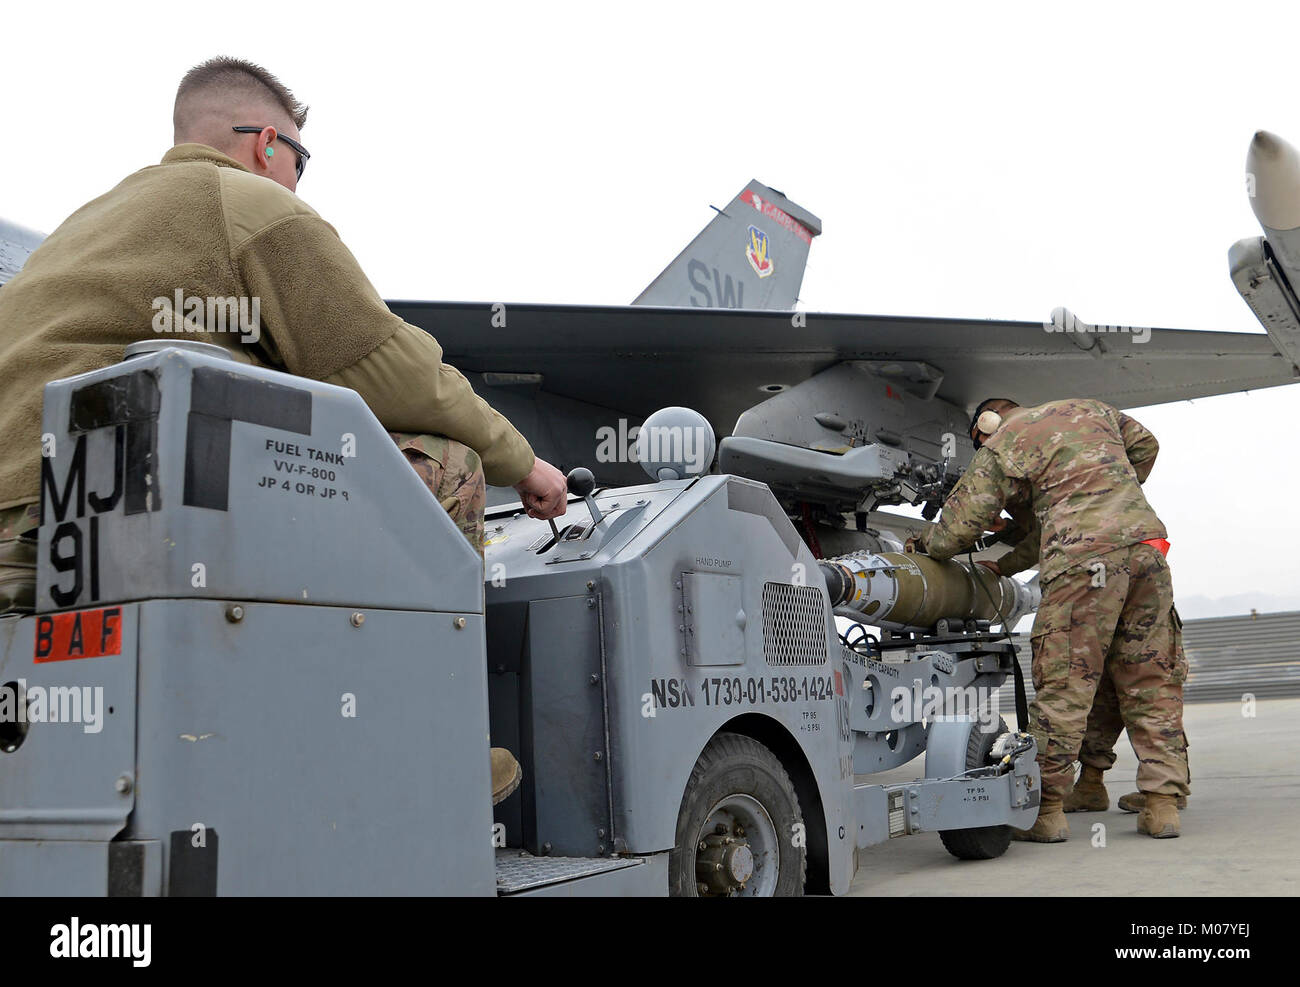 Senior Airman Kaleb Linn, 455th Expeditionary Aircraft Maintenance Squadron weapons load crew member, loads a munition onto an F-16 Fighting Falcon using a jammer Jan. 4, 2018 at Bagram Airfield, Afghanistan. Linn is responsible for maintaining the weapon's system on the F-16 as well as performing the weapons loads. (U.S. Air Force Stock Photo